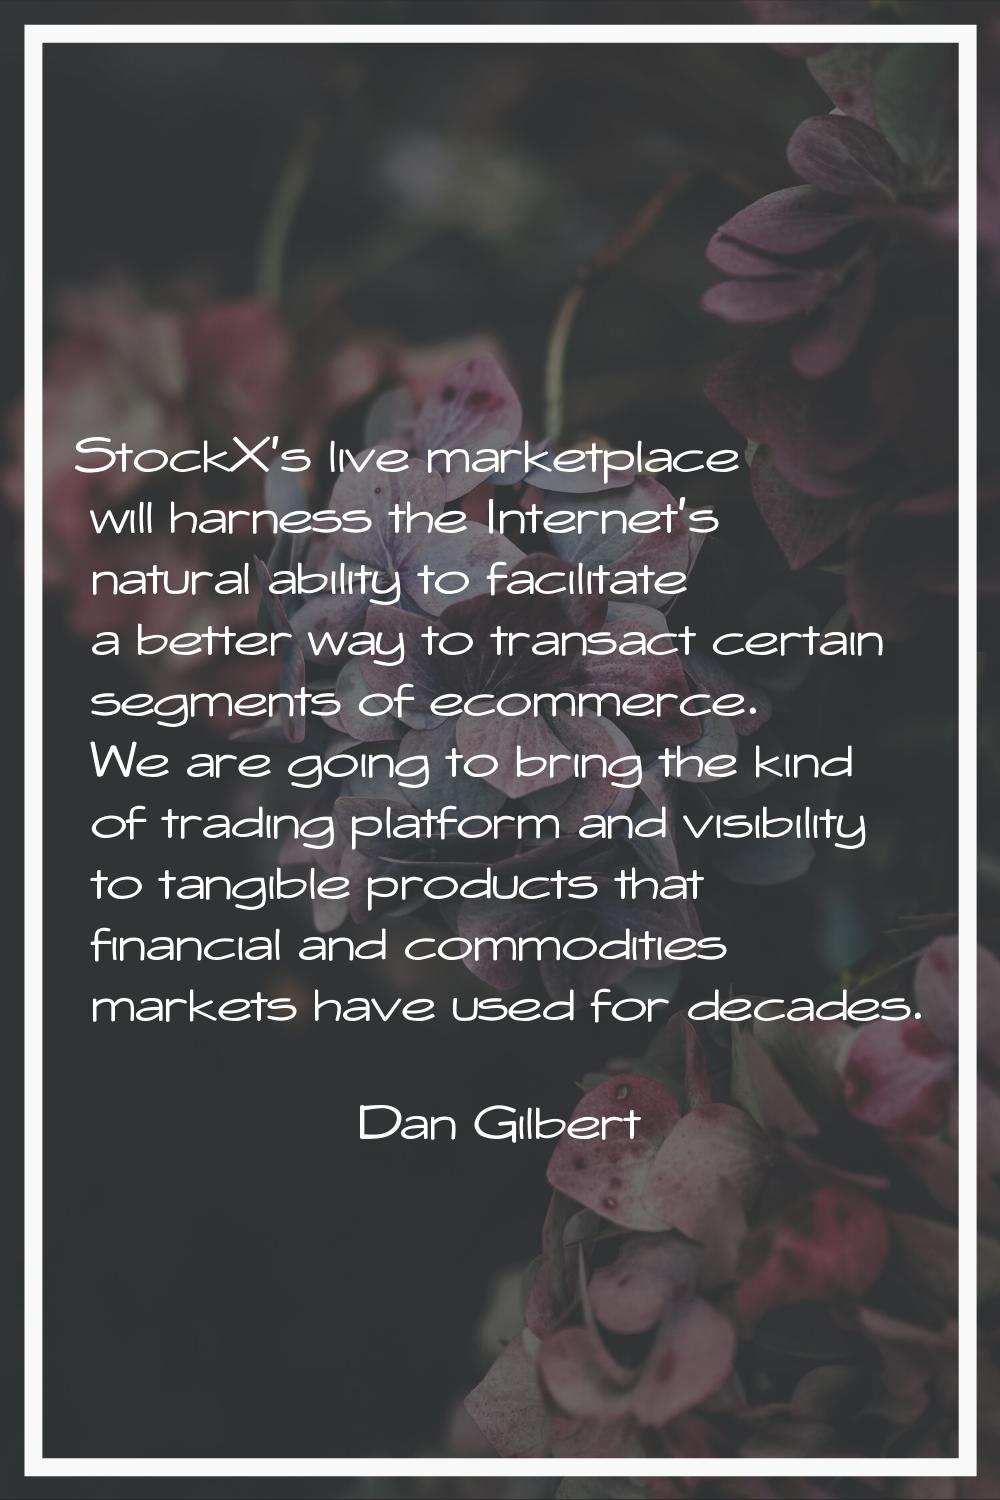 StockX's live marketplace will harness the Internet's natural ability to facilitate a better way to